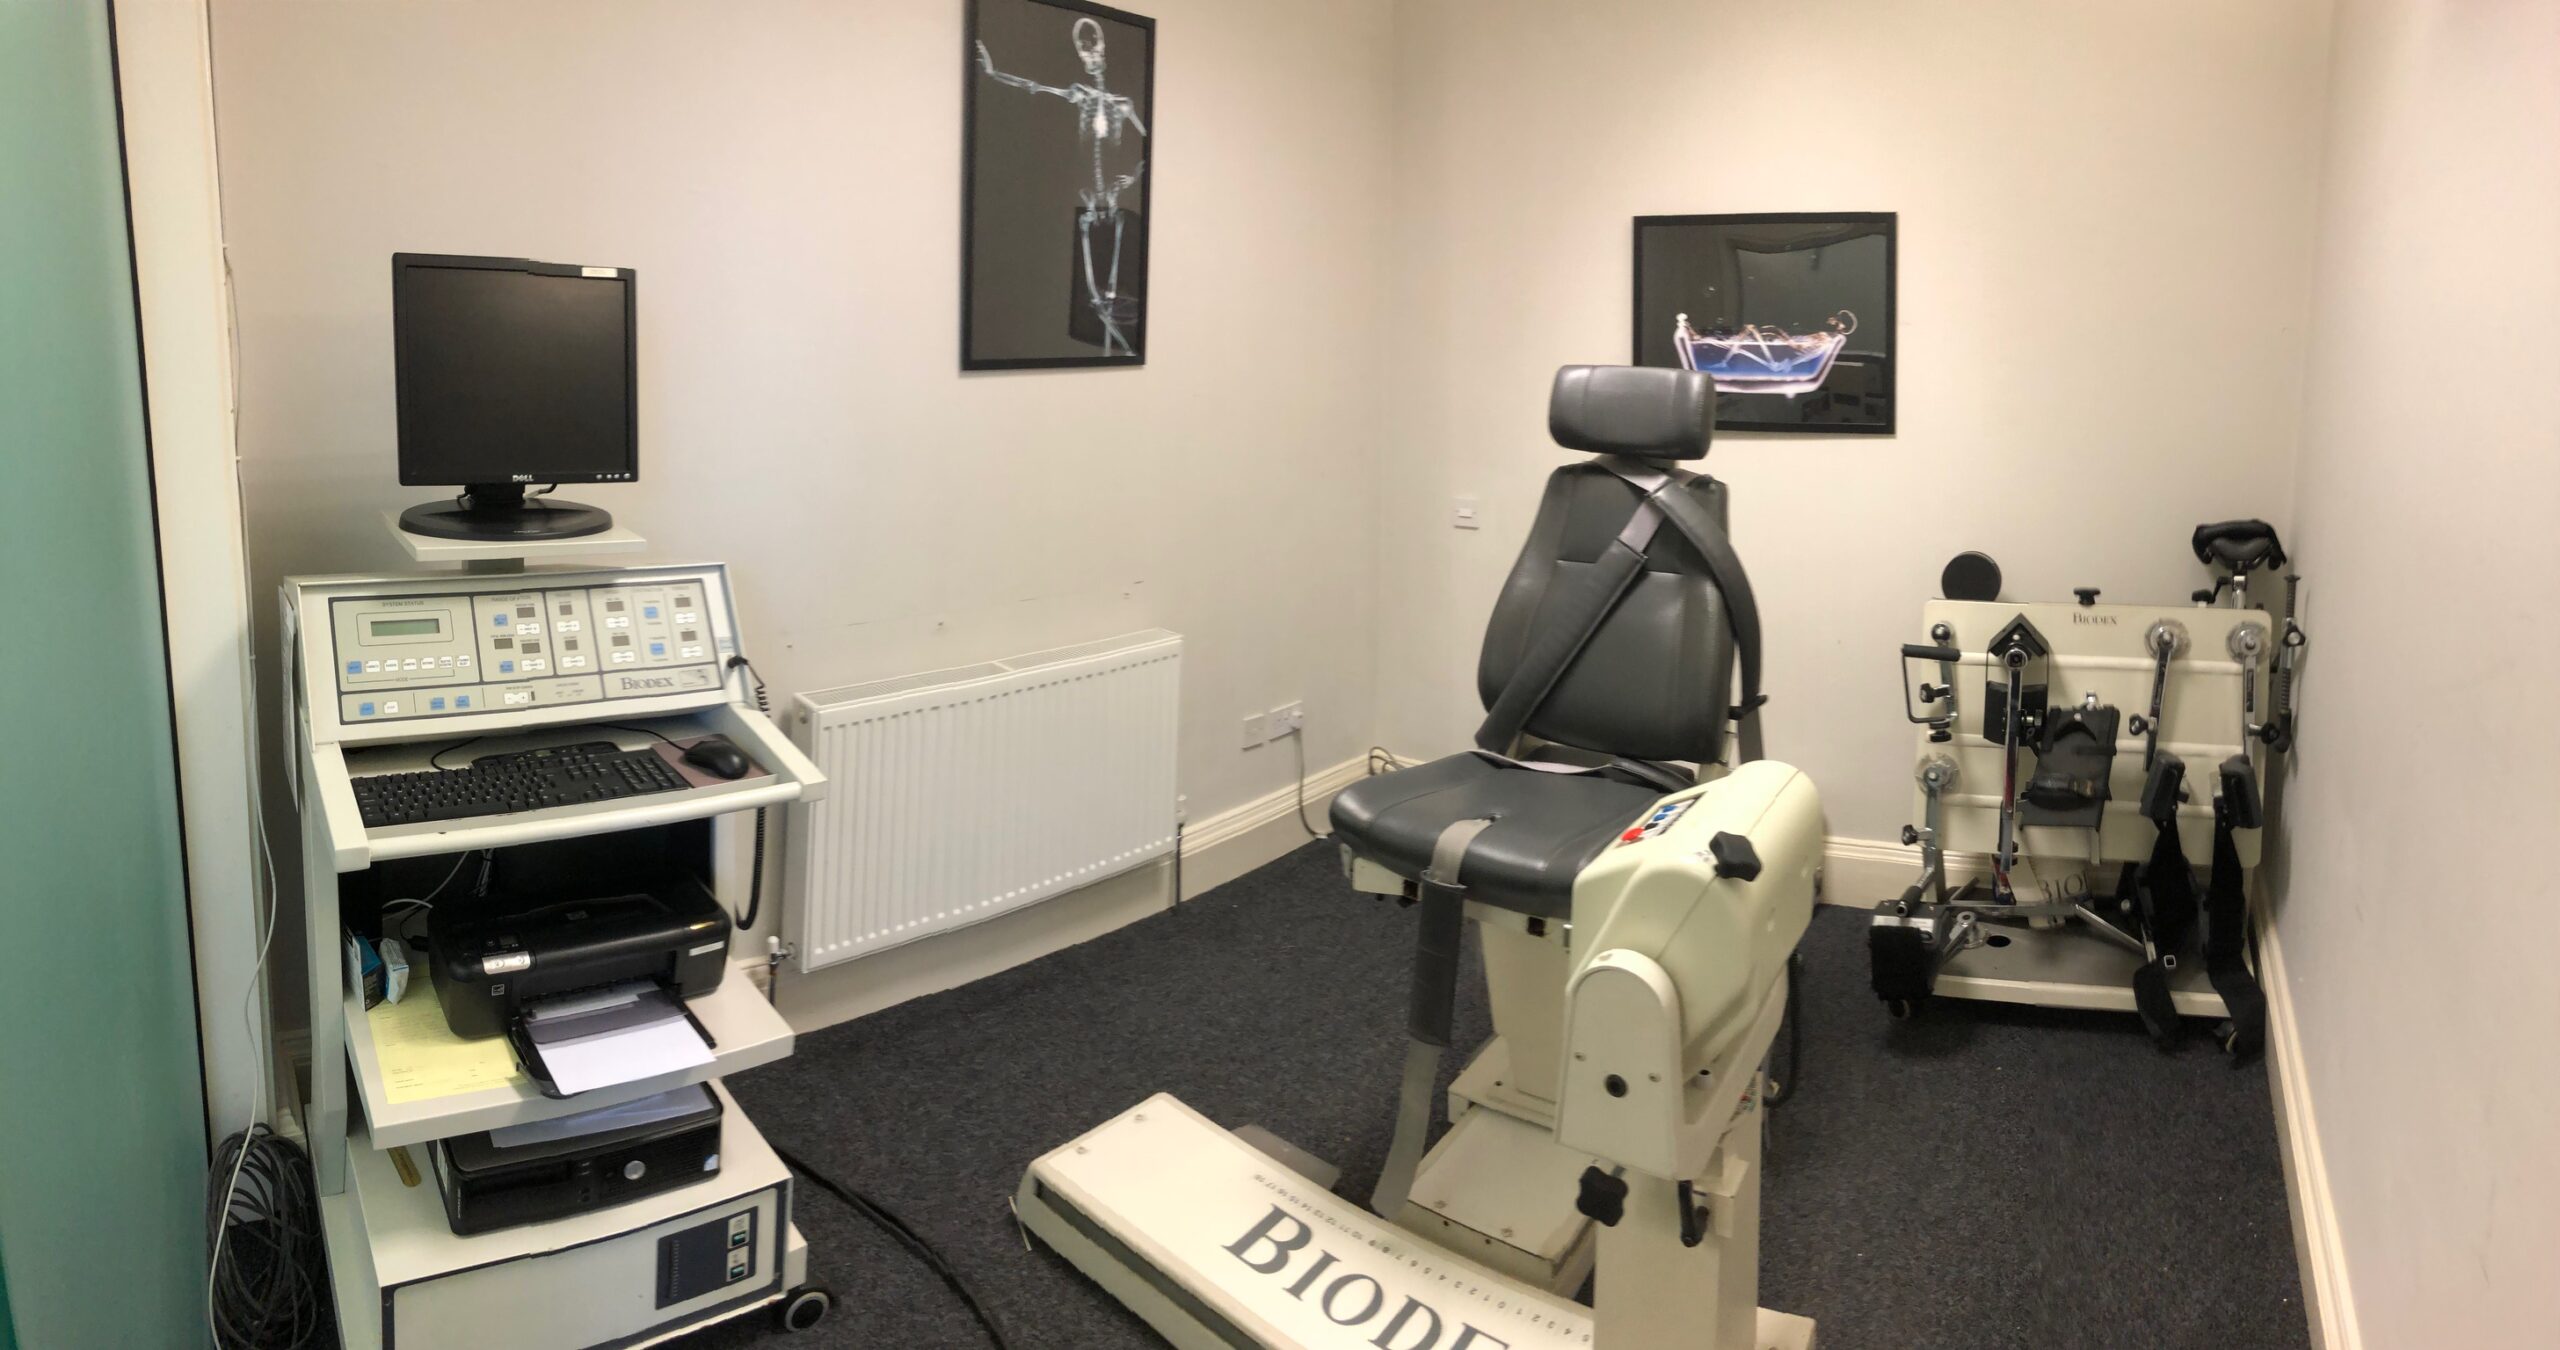 Physiotherapy treatments room with a Biodex isokinetic dynamometer